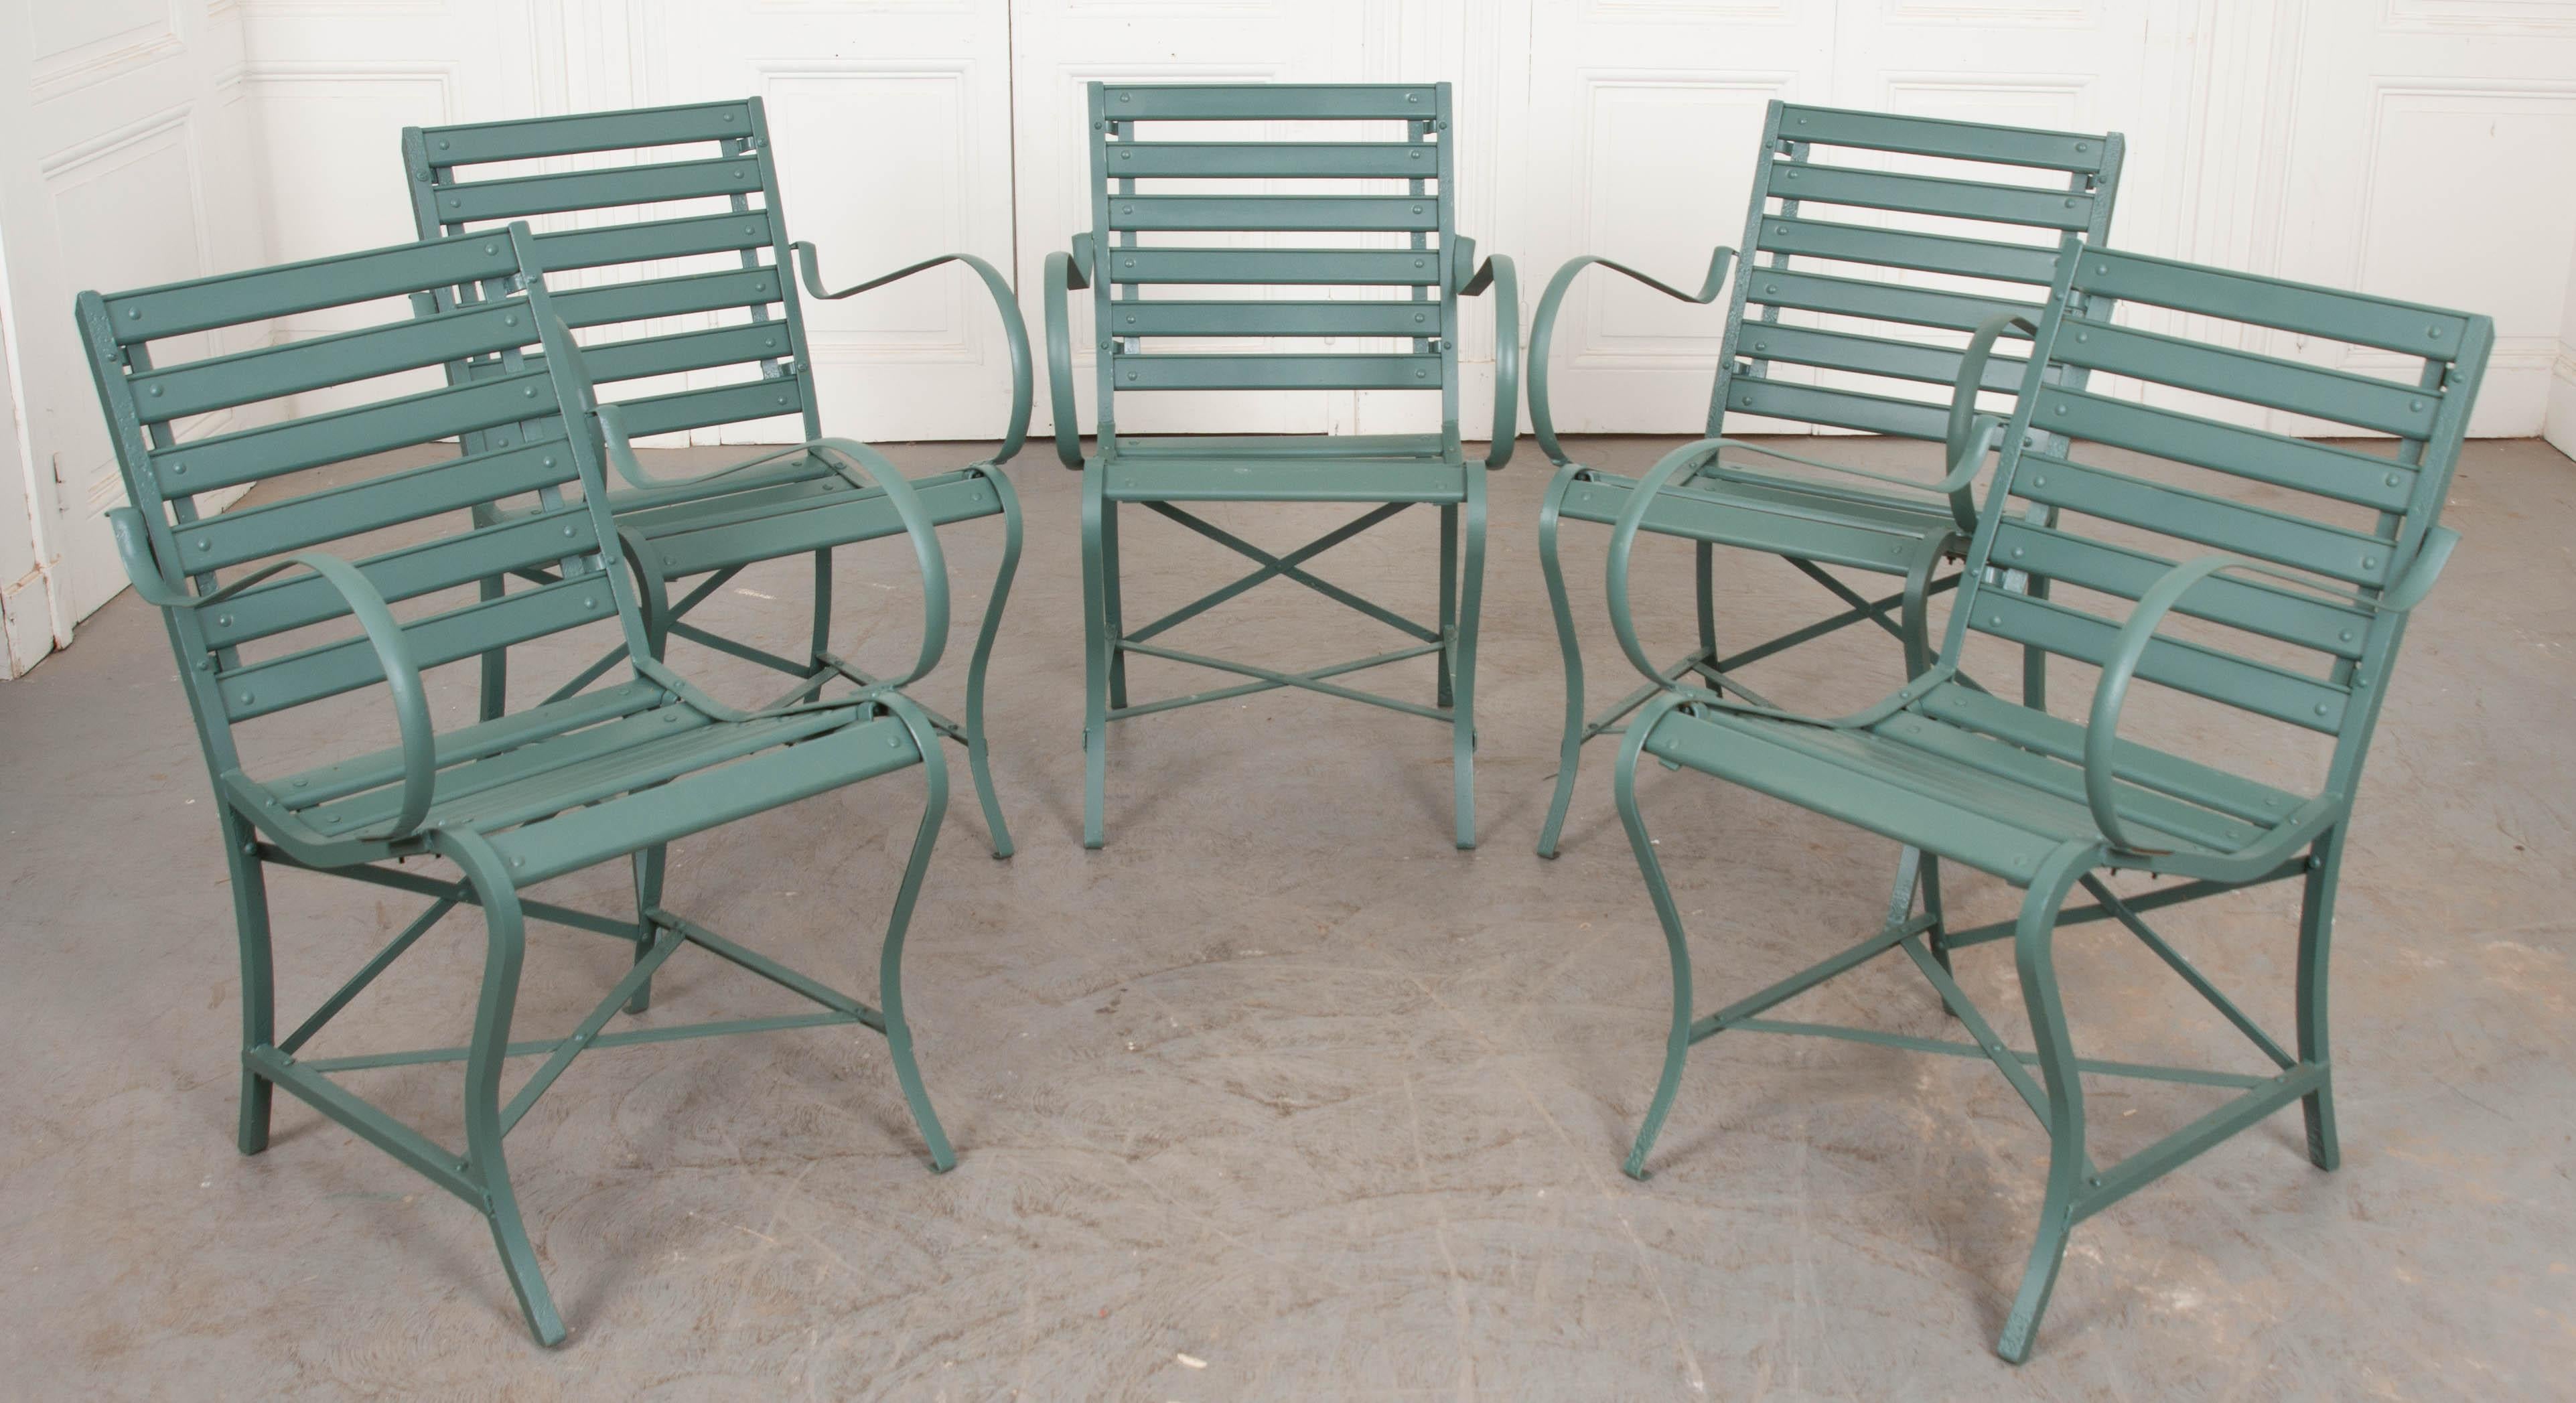 This cheerful set of five garden chairs was made in France towards the beginning of the 20th century. While the frames are vintage, when we purchased them in France, the wooden slats needed replacing. Once stateside, we replaced all slats with new,